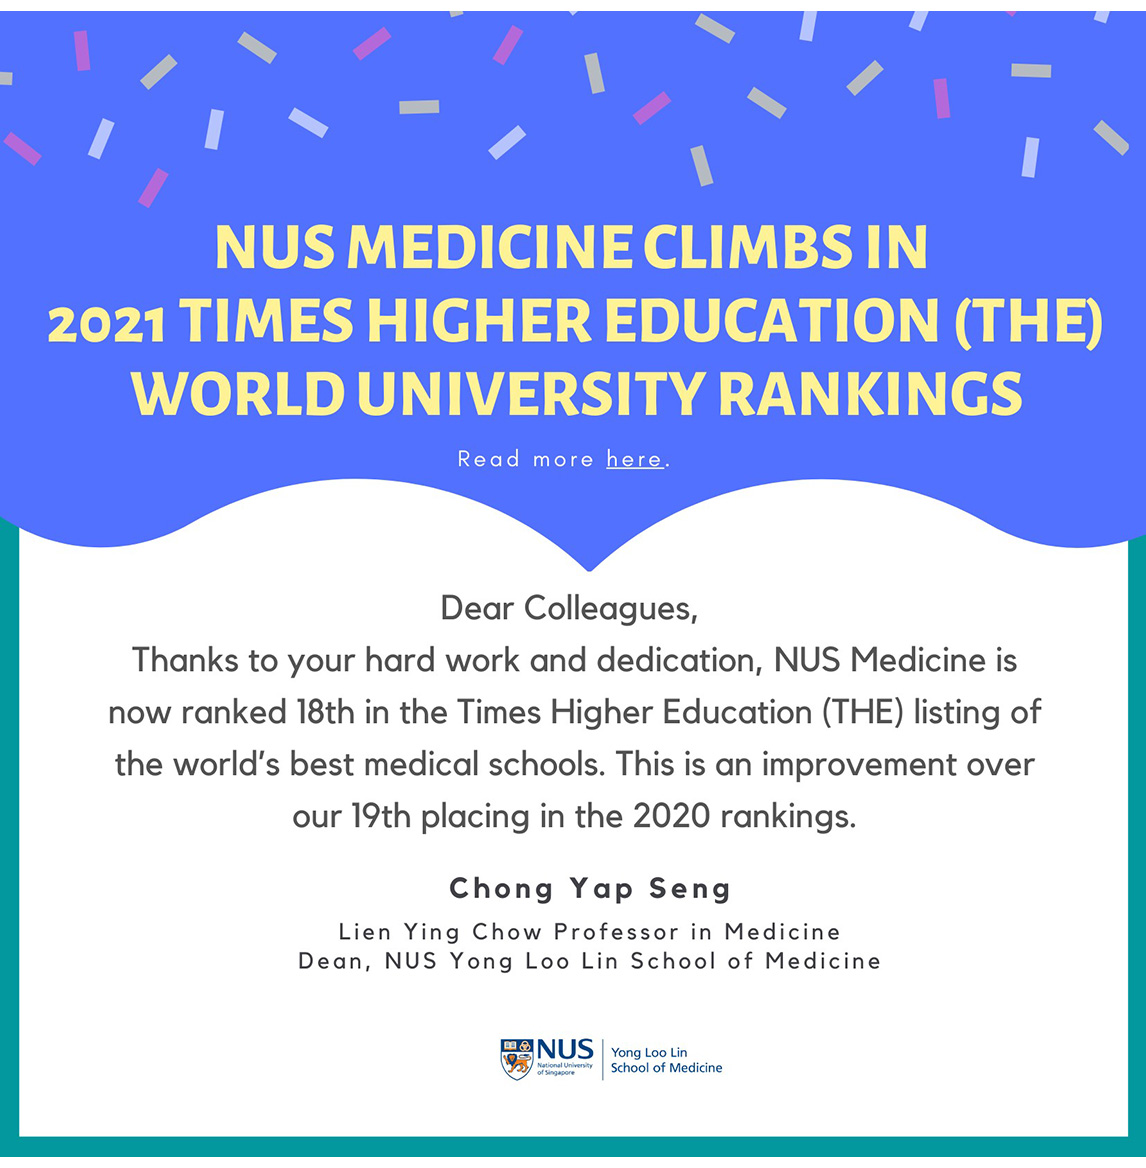 NUS Medicine is now no. 18th in 2021 Times Higher Education (THE) World University Rankings!